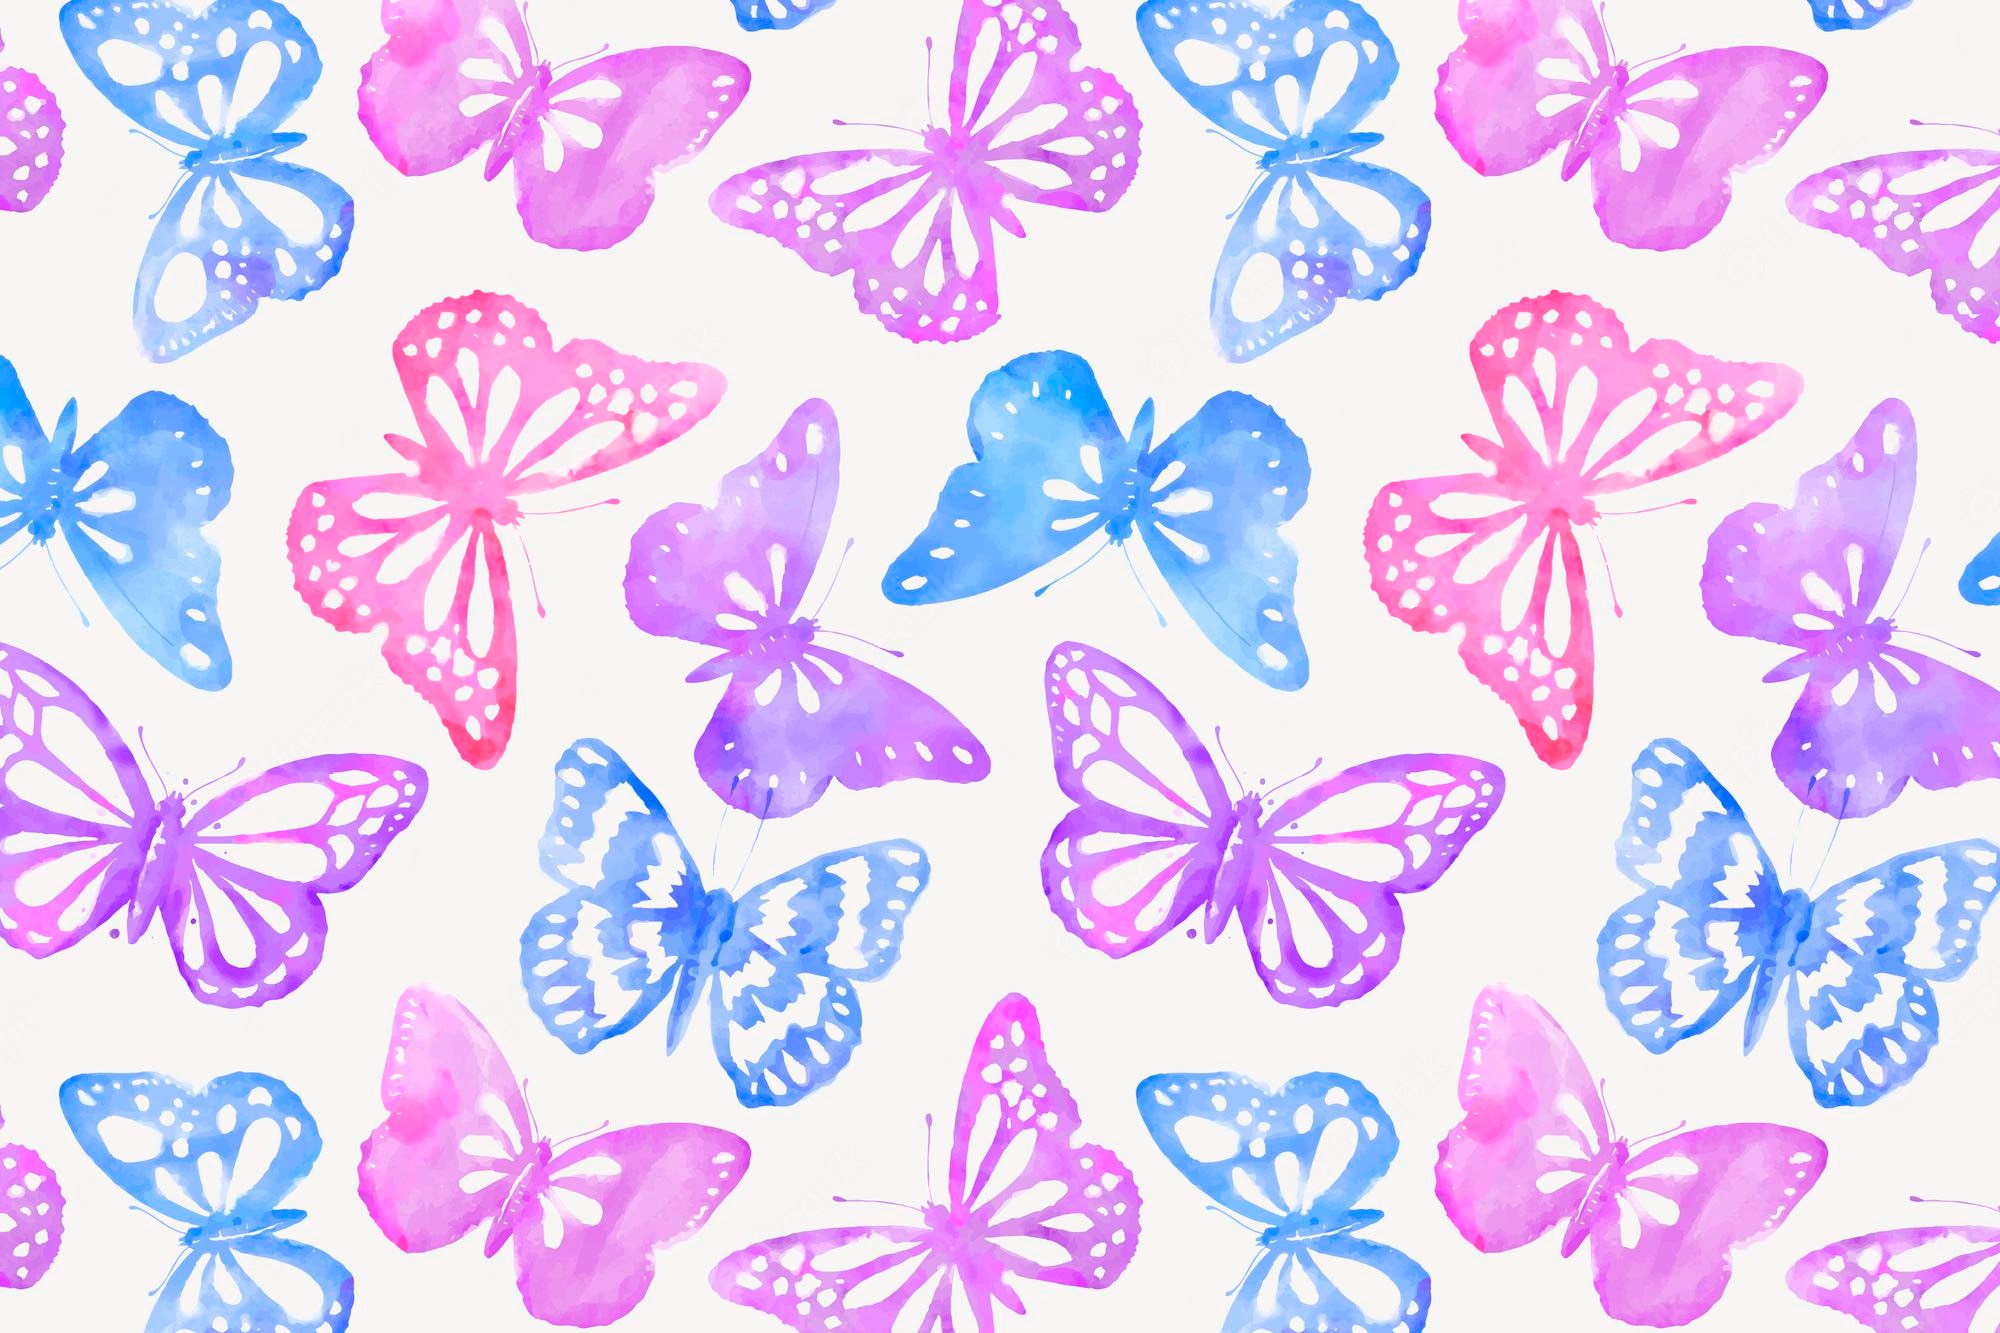 Lavender Butterfly Wallpapers